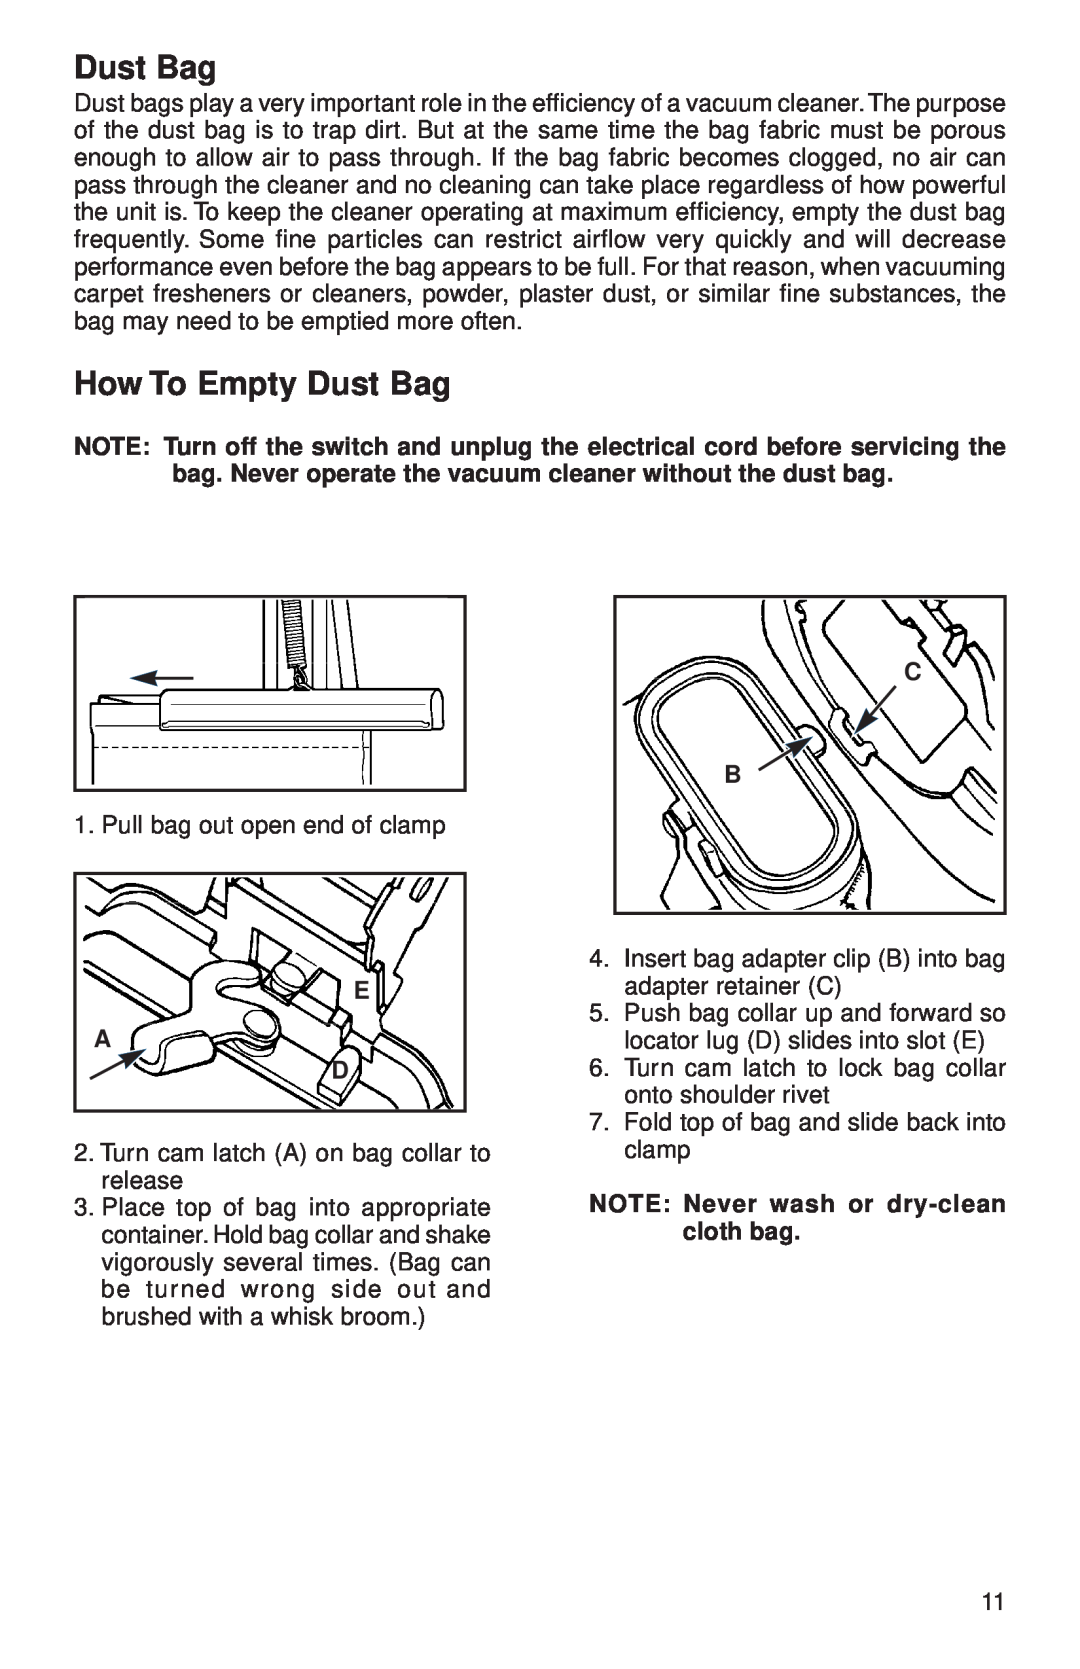 Sanitaire SC899 warranty How To Empty Dust Bag, E A D, NOTE Never wash or dry-cleancloth bag 